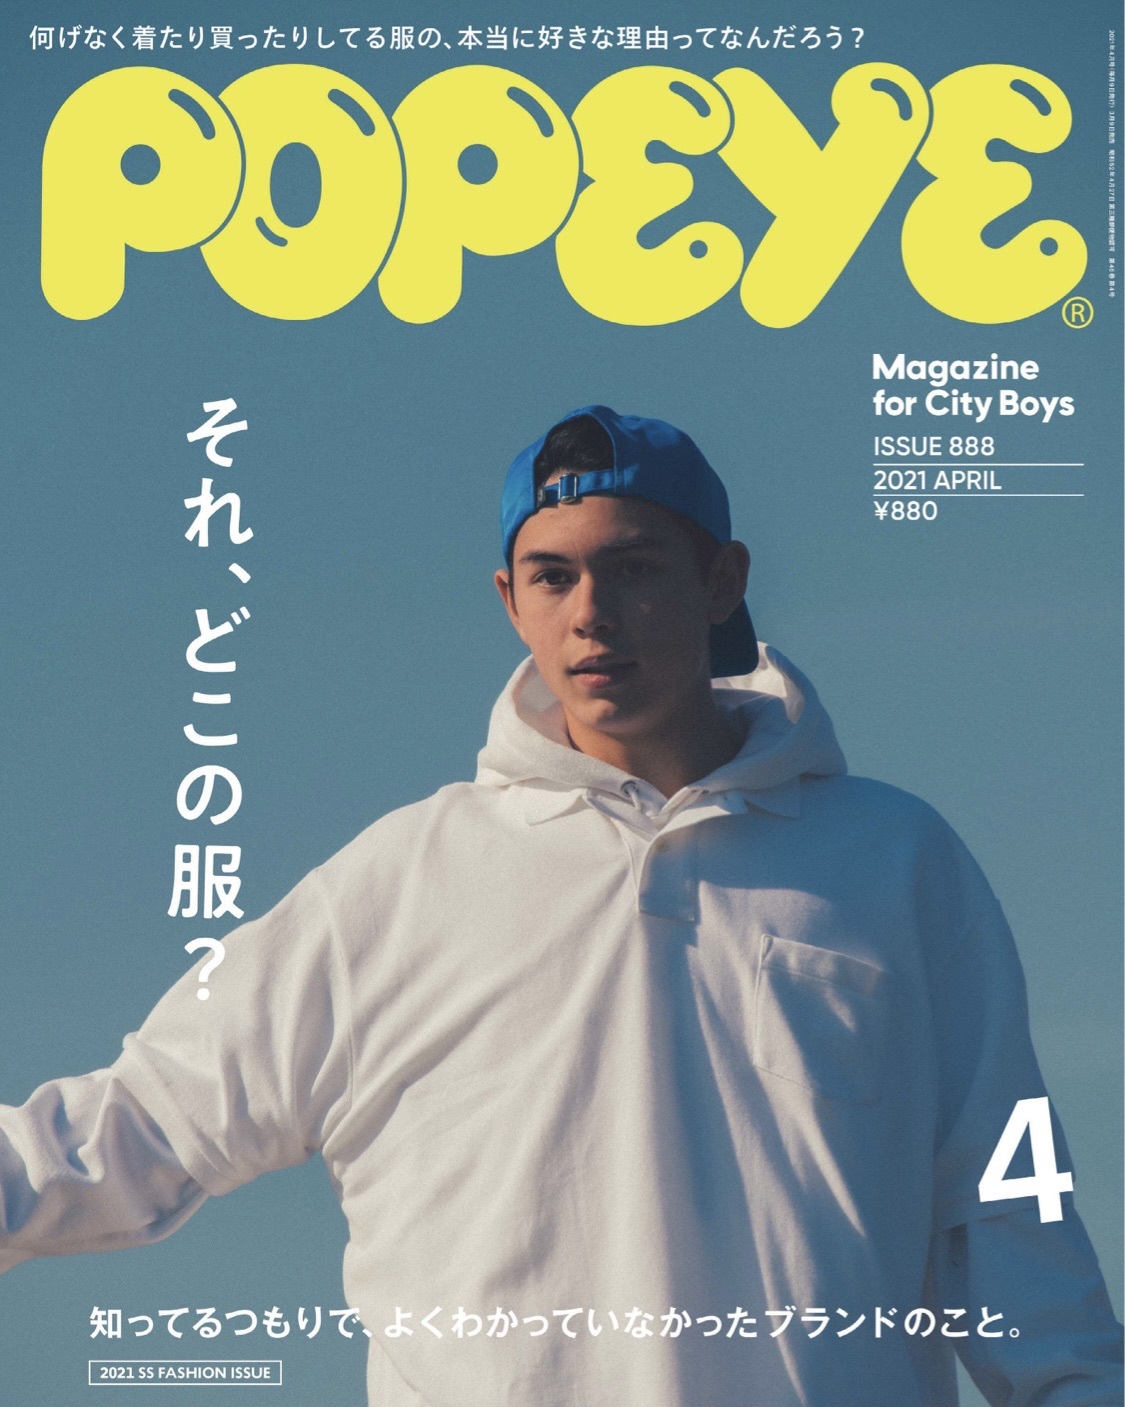 【"STORY" Back number 373】POPEYE 4月号にて